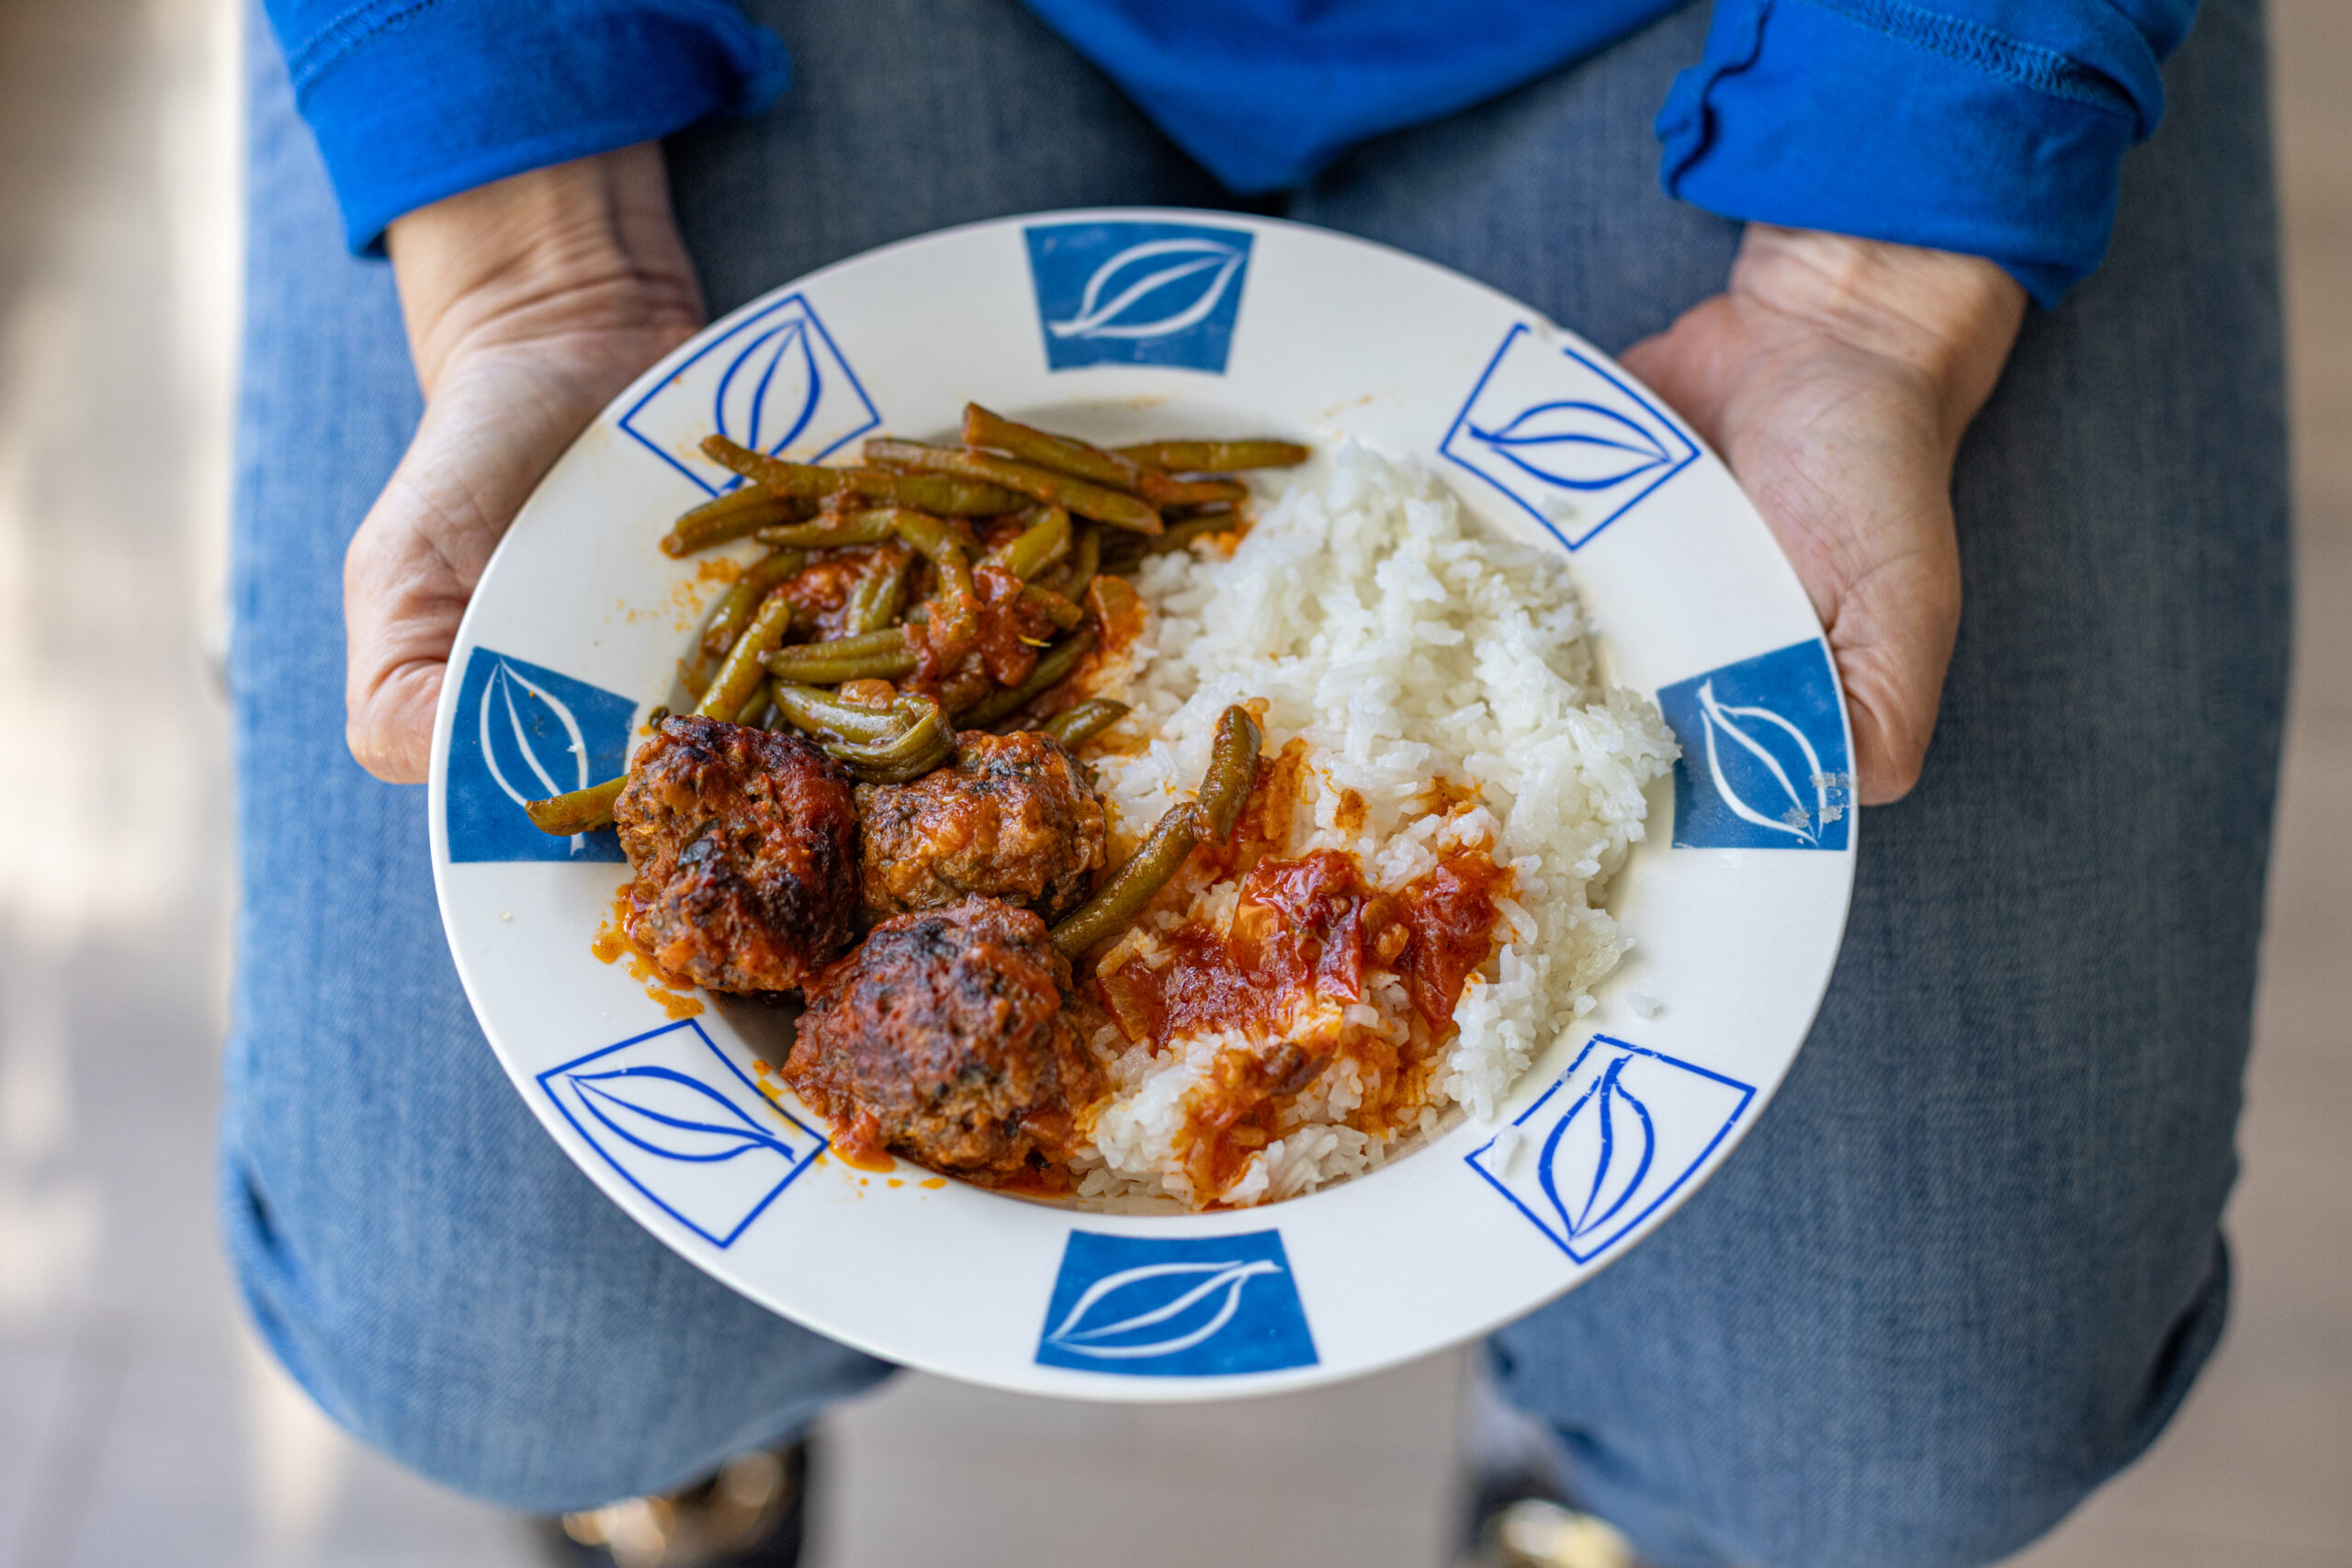 Person in jeans holding a blue and white plate of rice, green beans, and meatballs